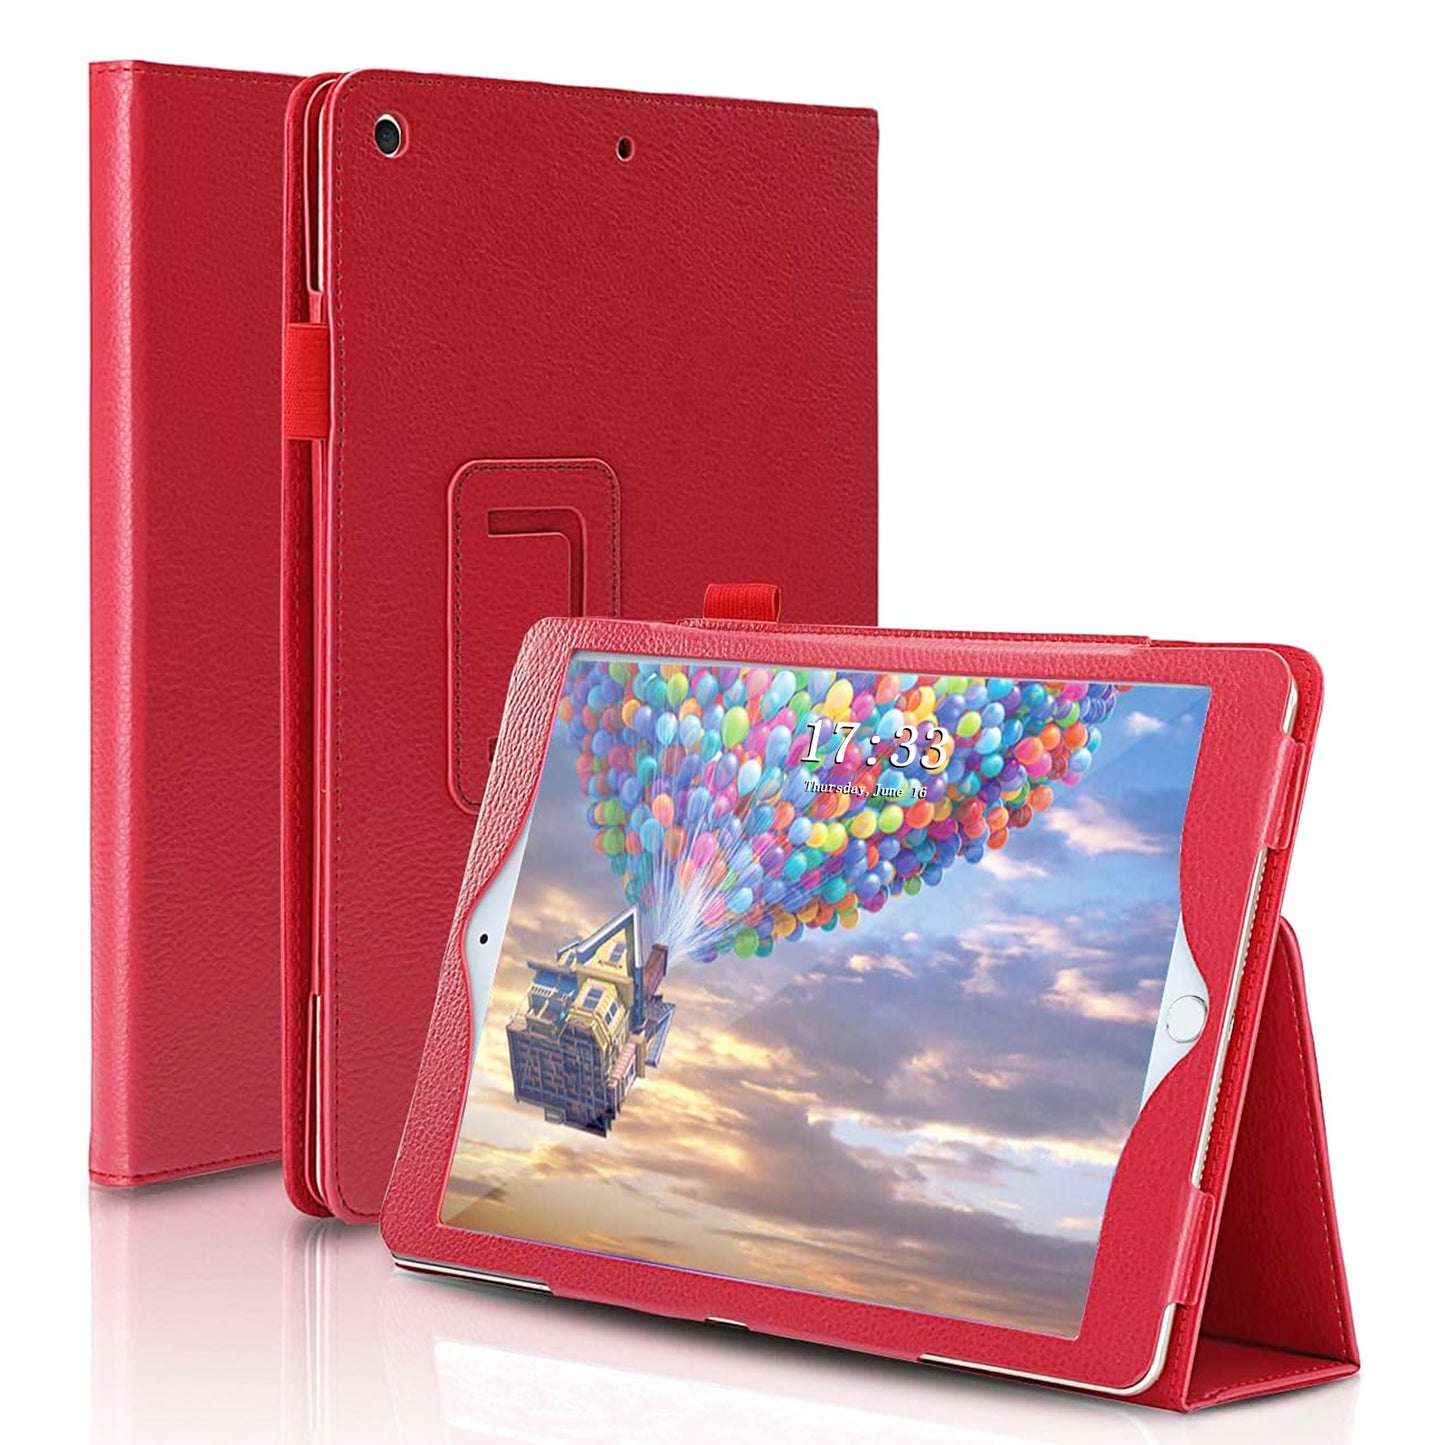 FANSONG iPad Case Mini 1 2 3, Cover for iPad 7.9 inch Generation Magnetic Closure PU Leather Smart Cover Flip Shockproof Slim Pencil Holder Bifold Stand Features for Apple iPad Mini 1 2nd 3rd